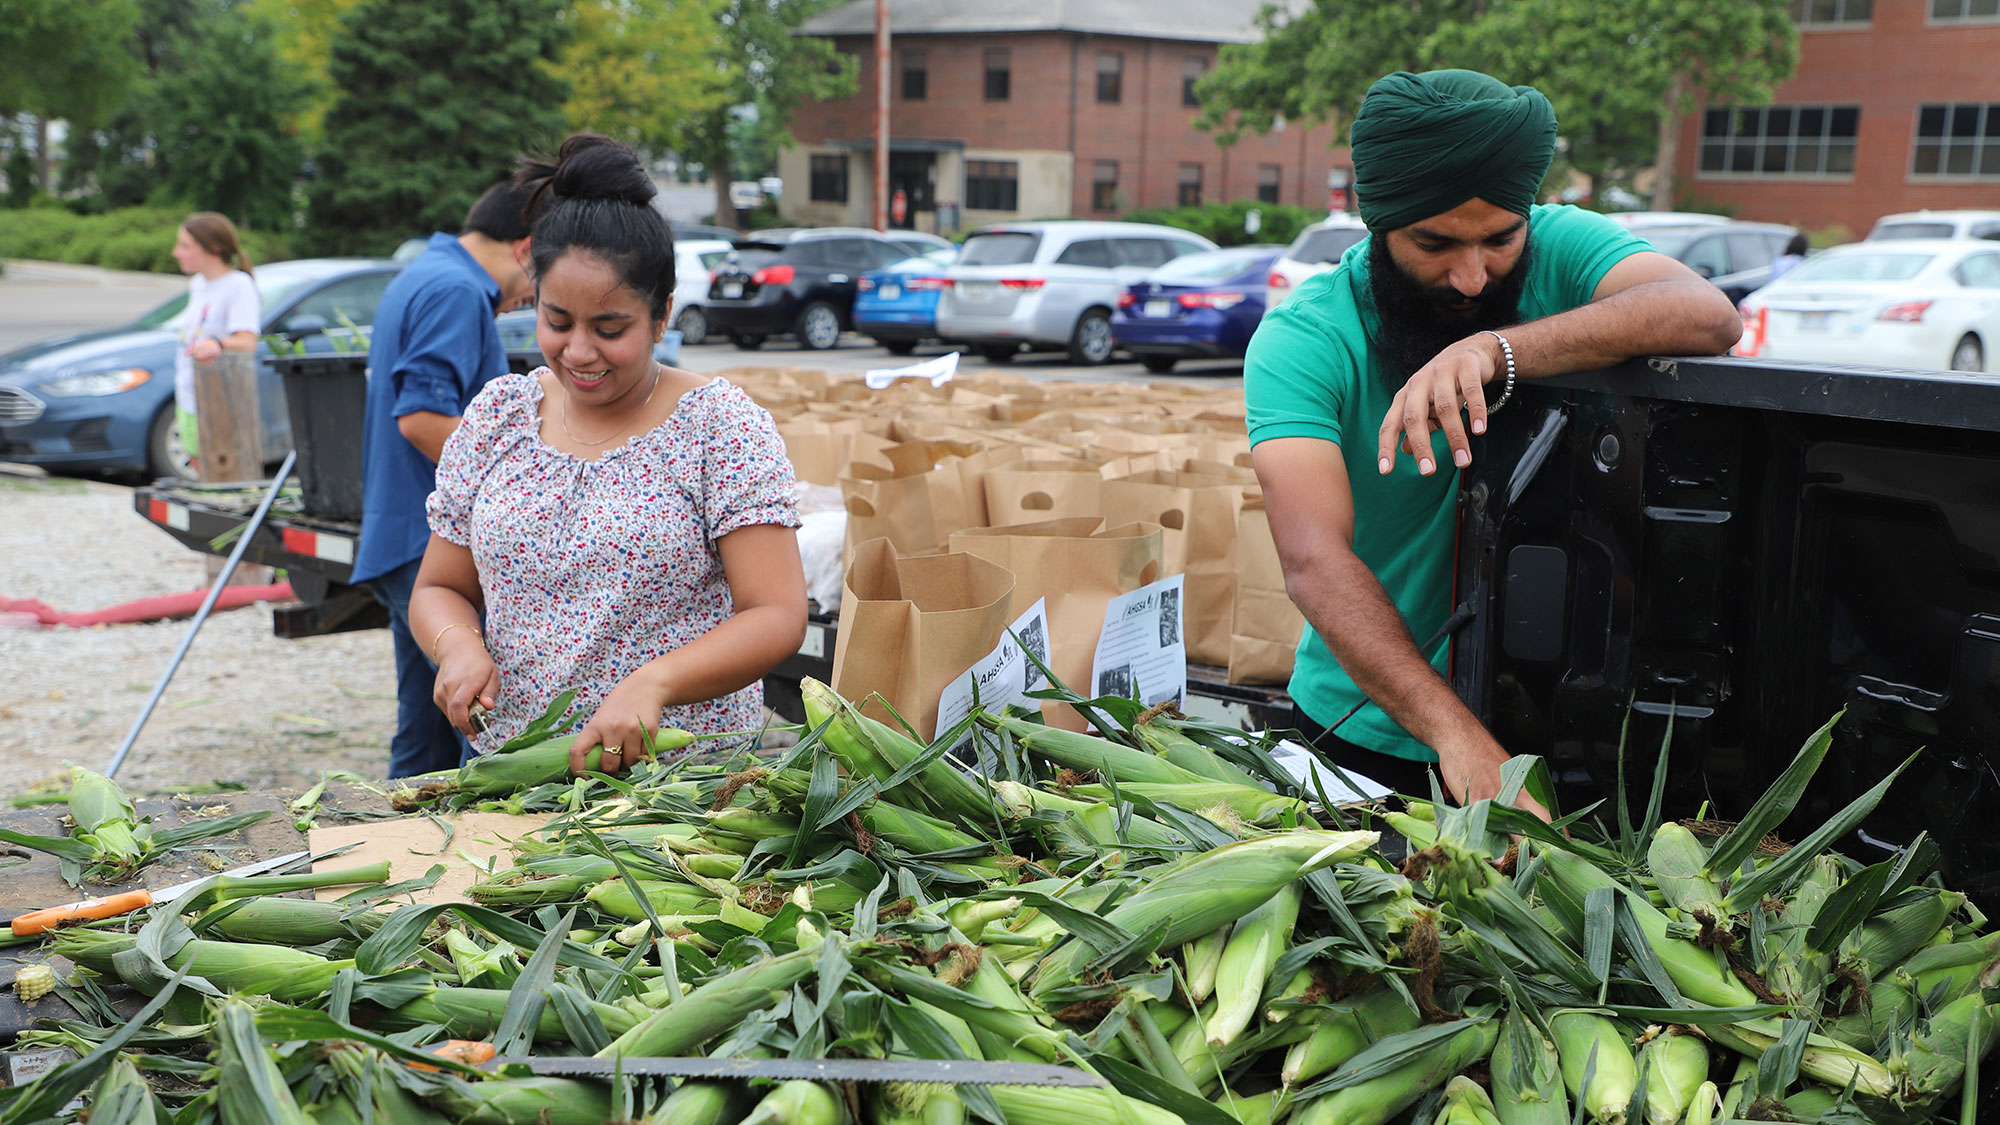 AHGSA sweet corn giveaway will be held July 21 at the Keim/PLSH parking lot on East Campus.